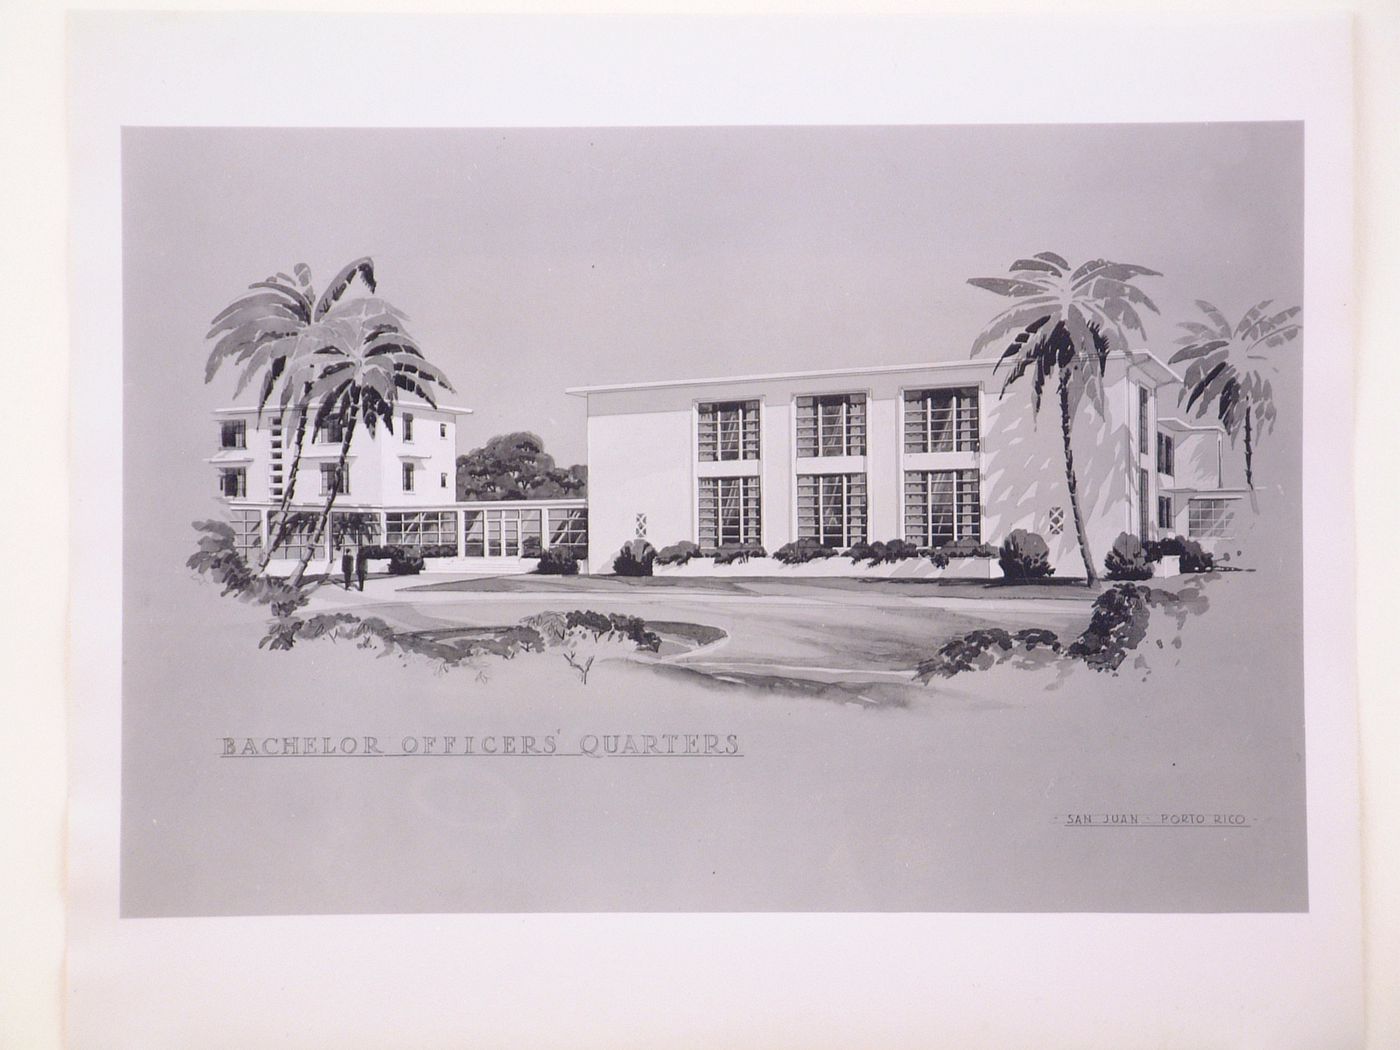 Photograph of a perspective drawing for or of the Bachelor Officers' Quarters, United States Naval Air Base, San Juan, Puerto Rico